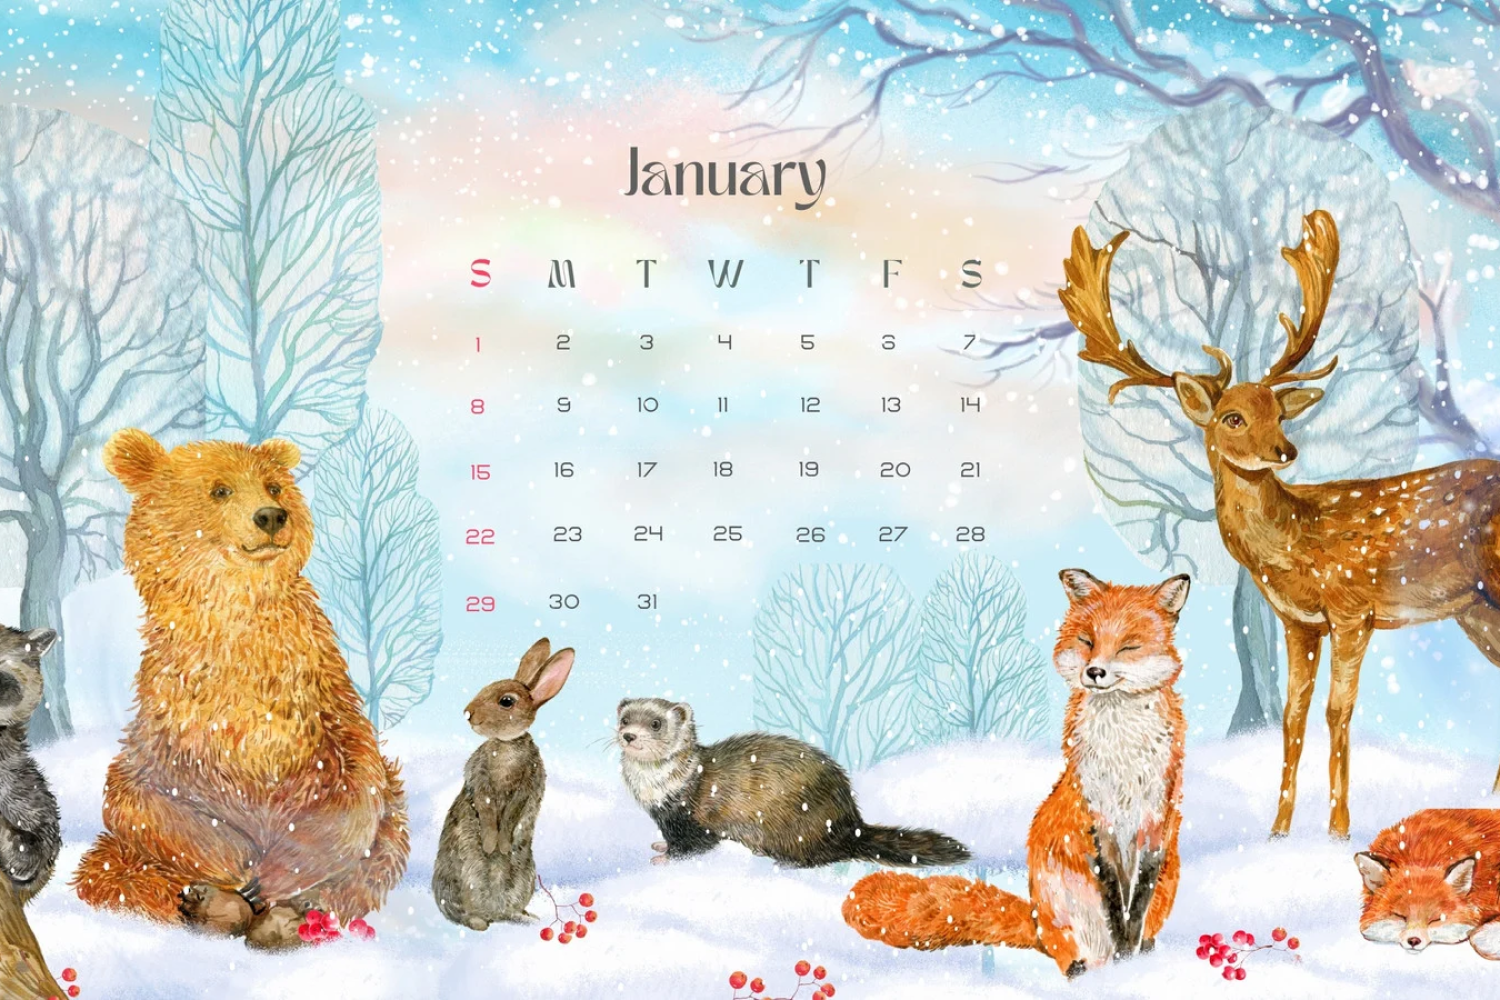 Calendar for january with drawn forest animals.